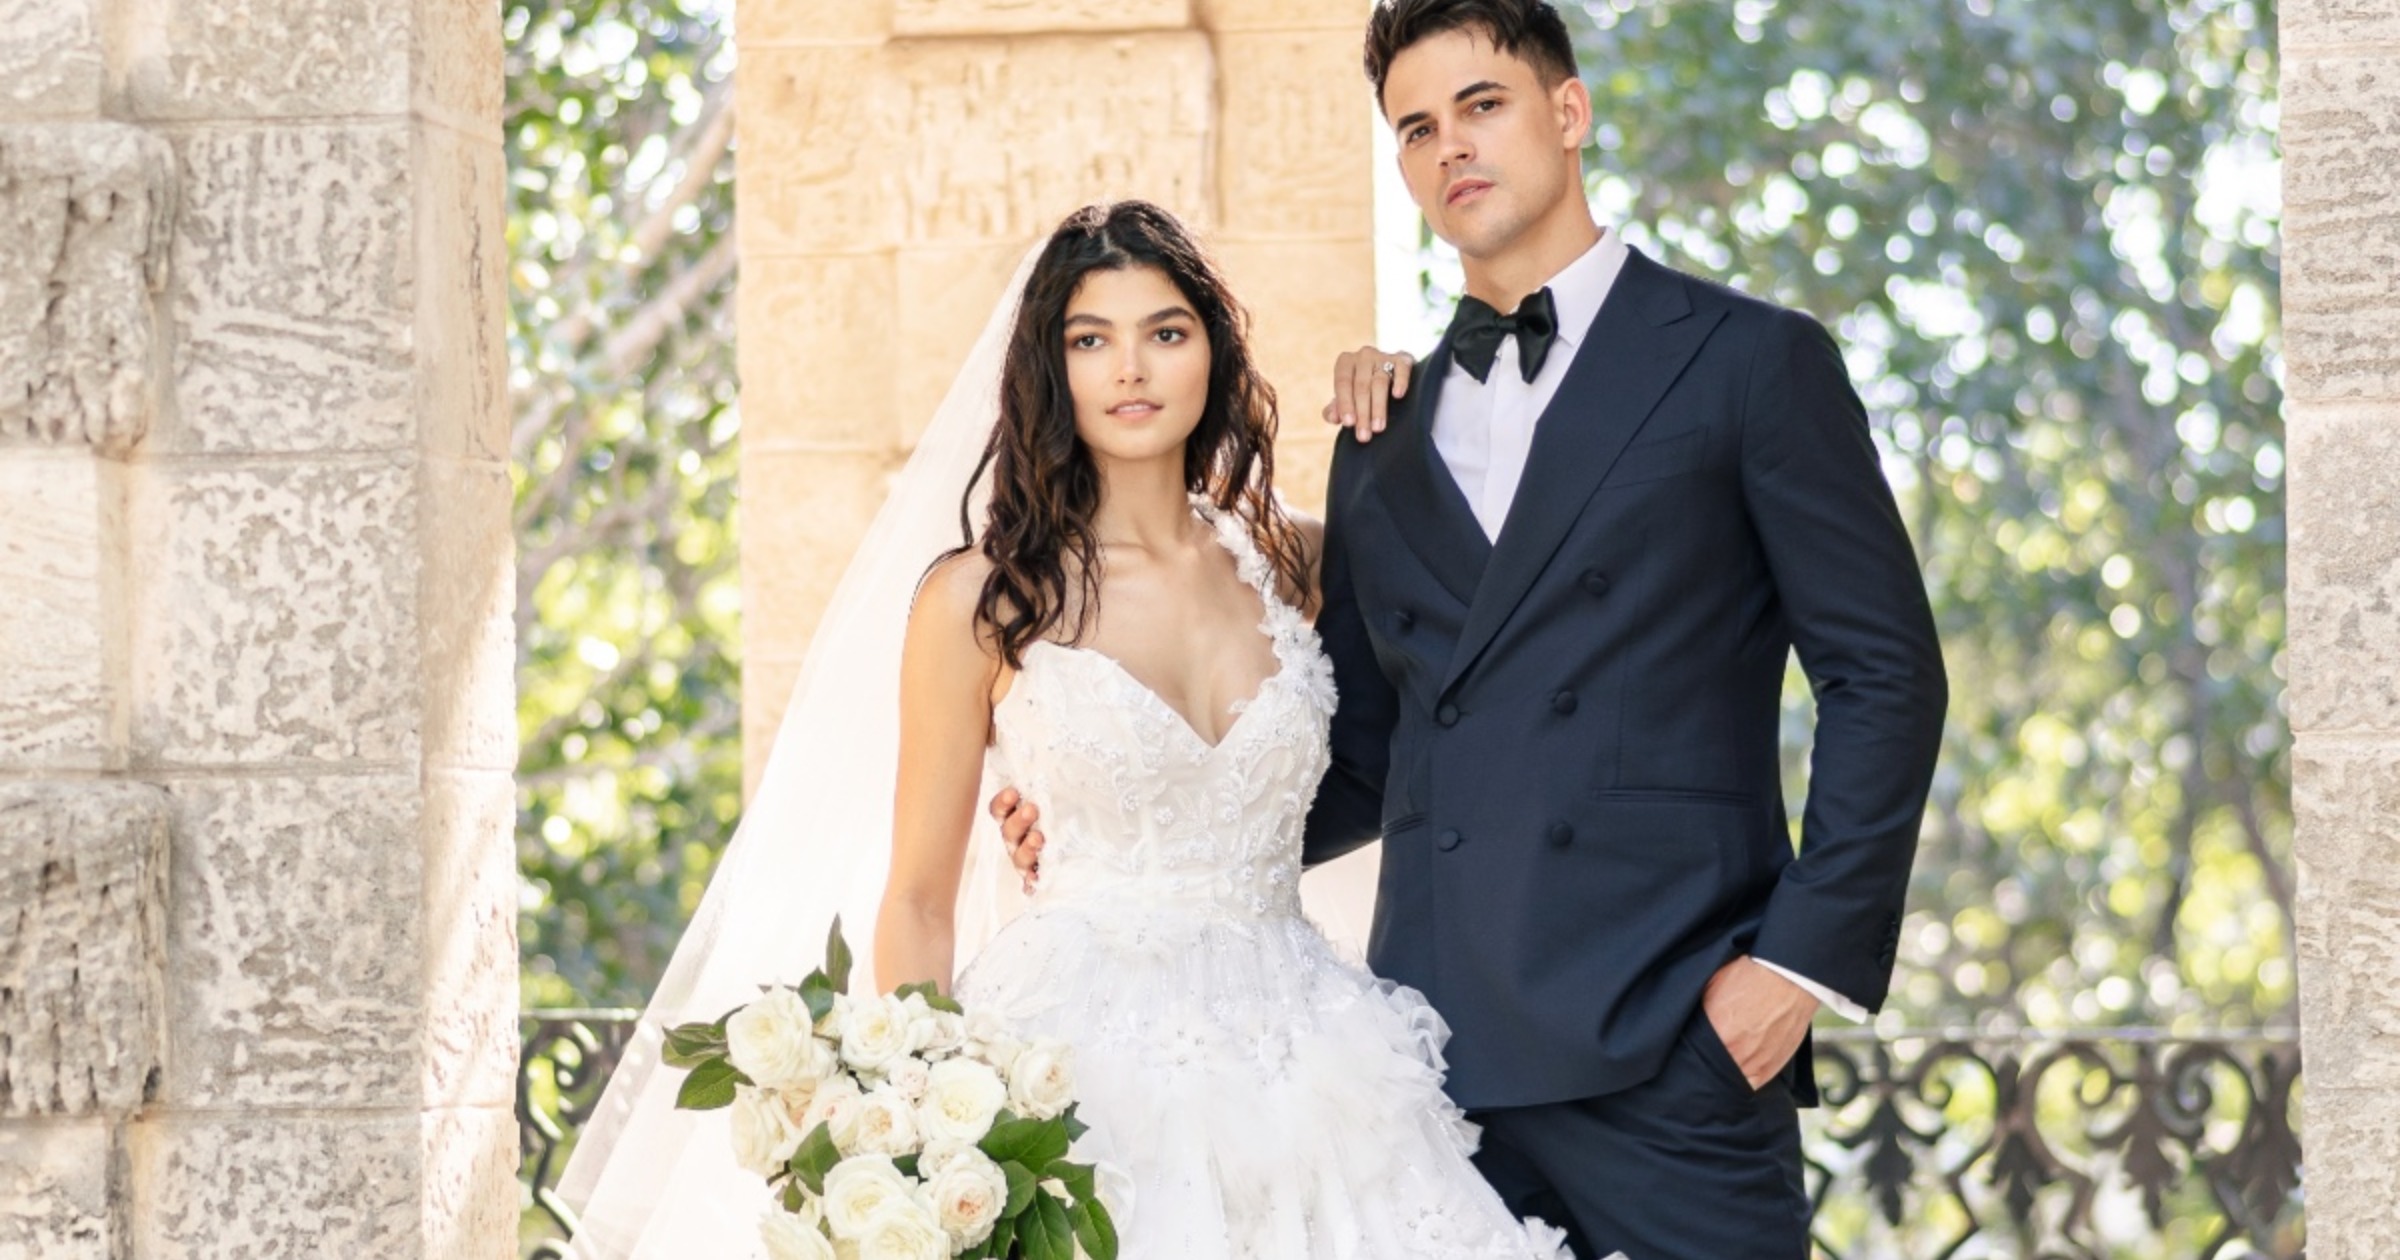 A refined Miami garden wedding full of natural beauty and luxury